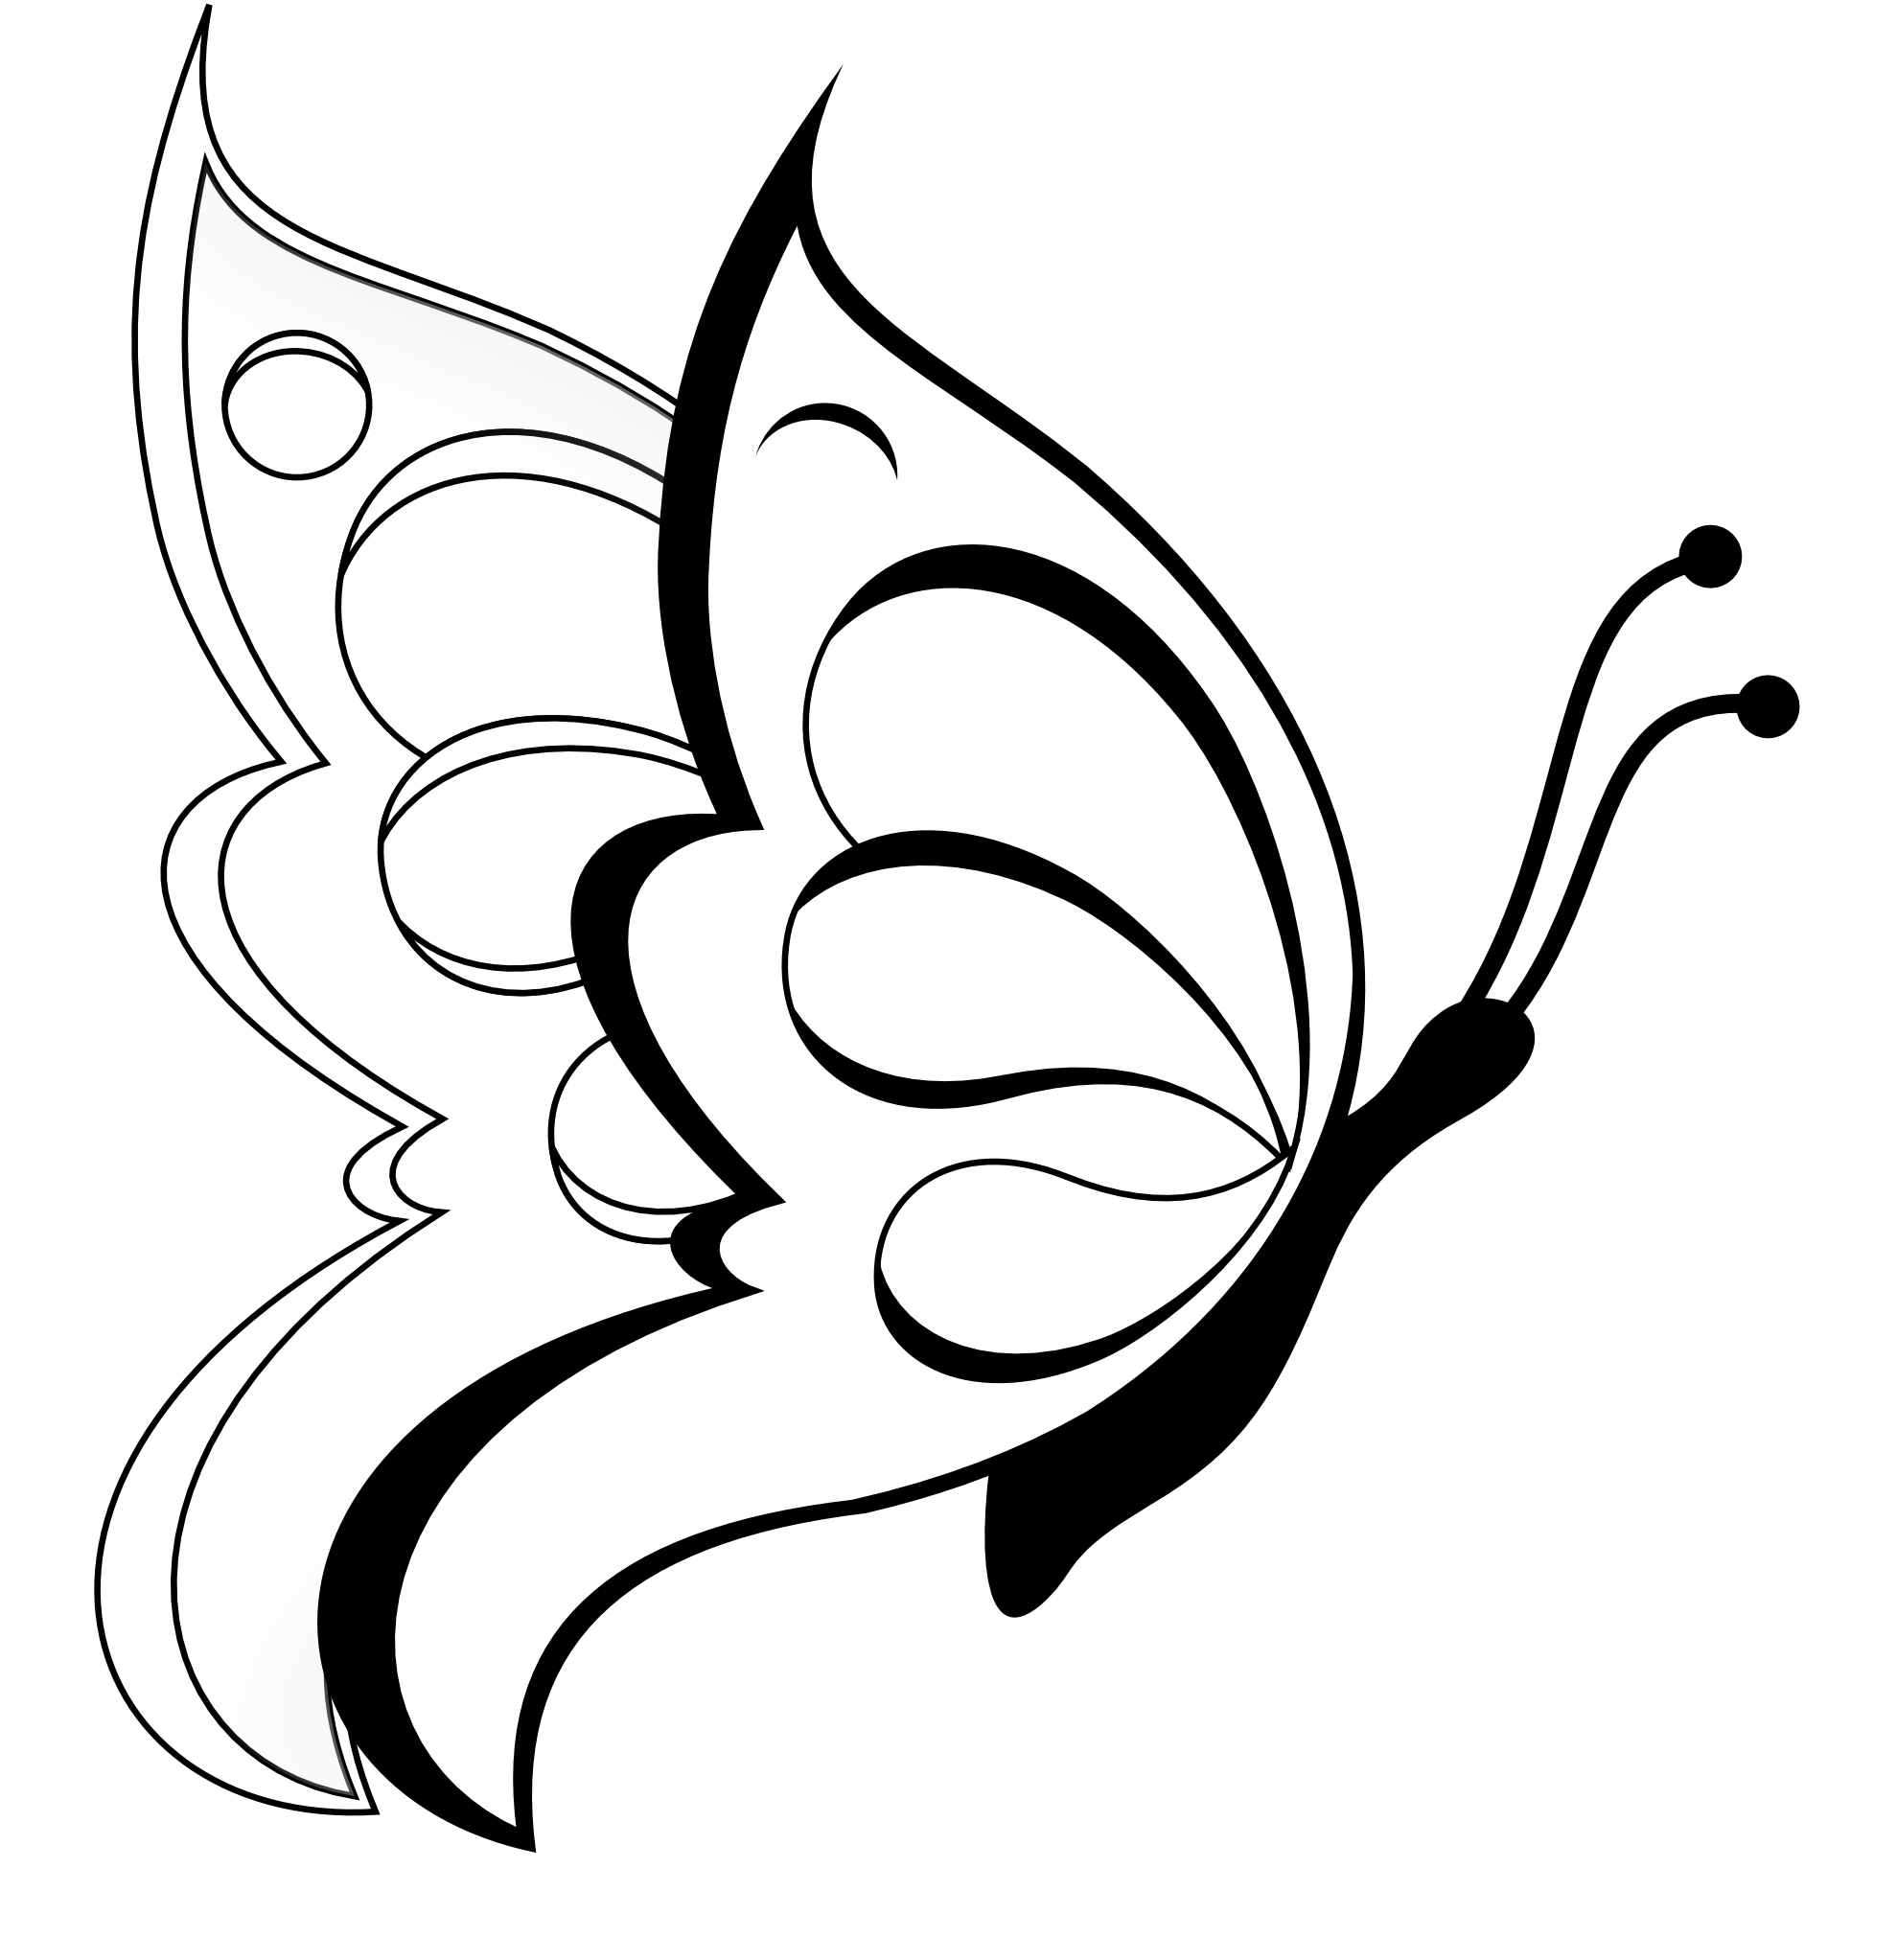 Dragonfly Clipart Black And White - ClipArt Best